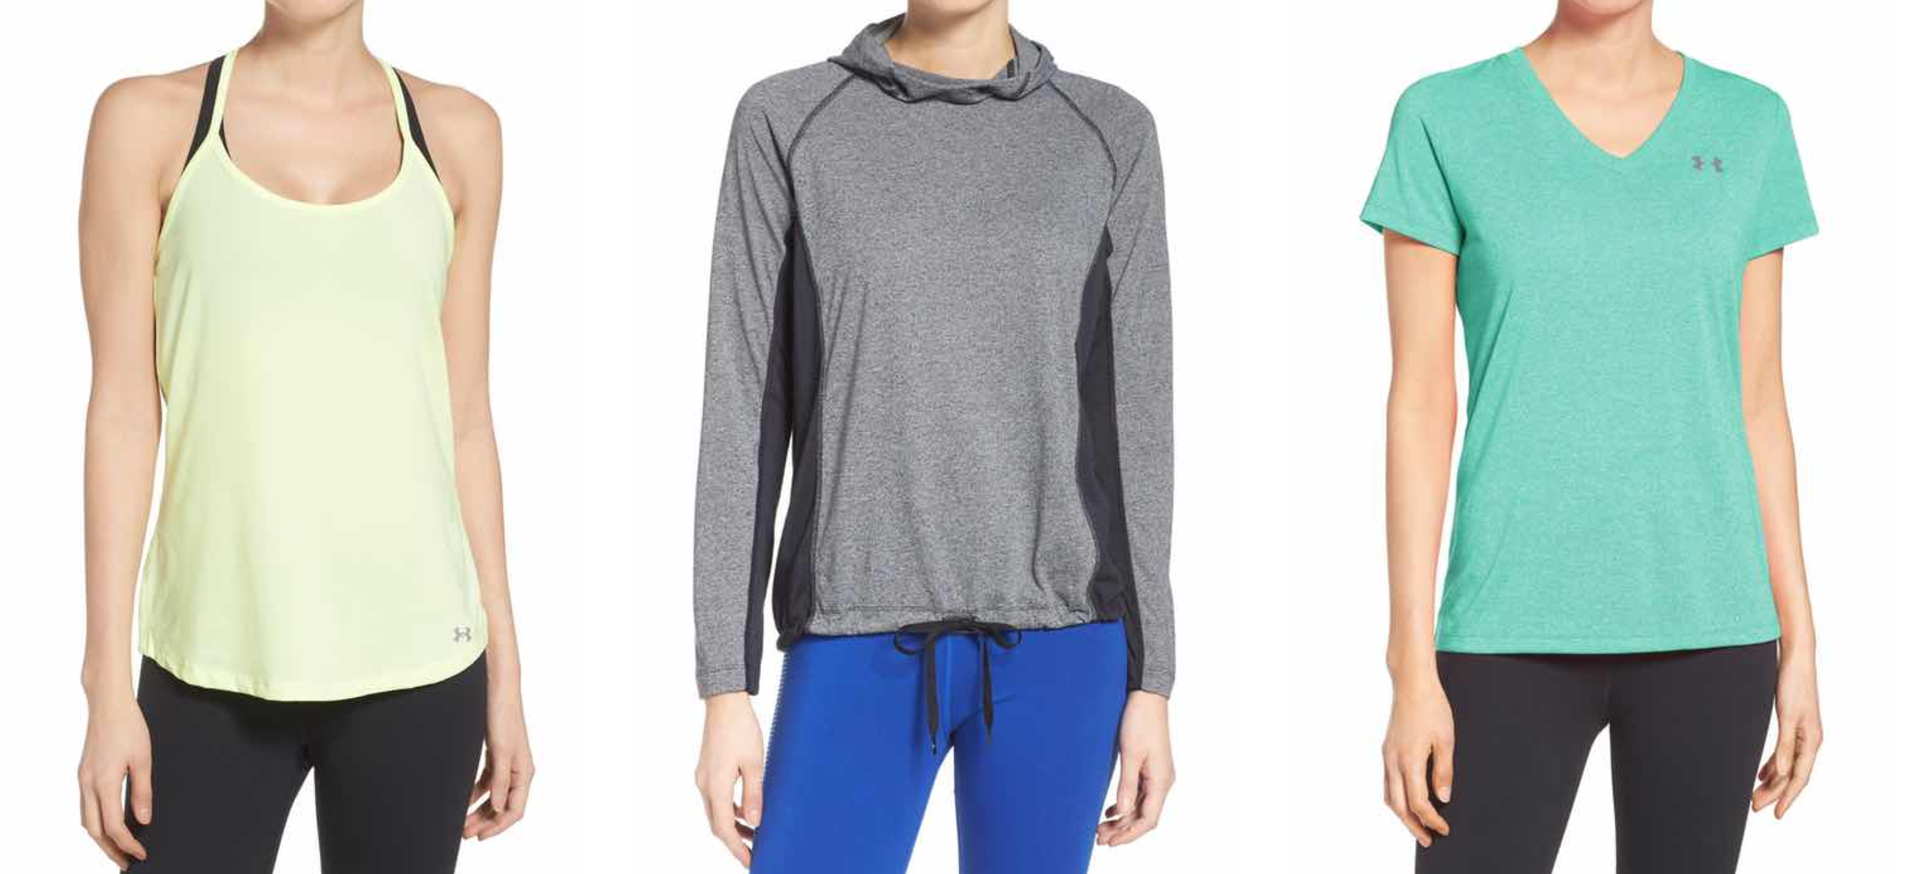 Lululemon's Color And Europe Problems Create Under Armour